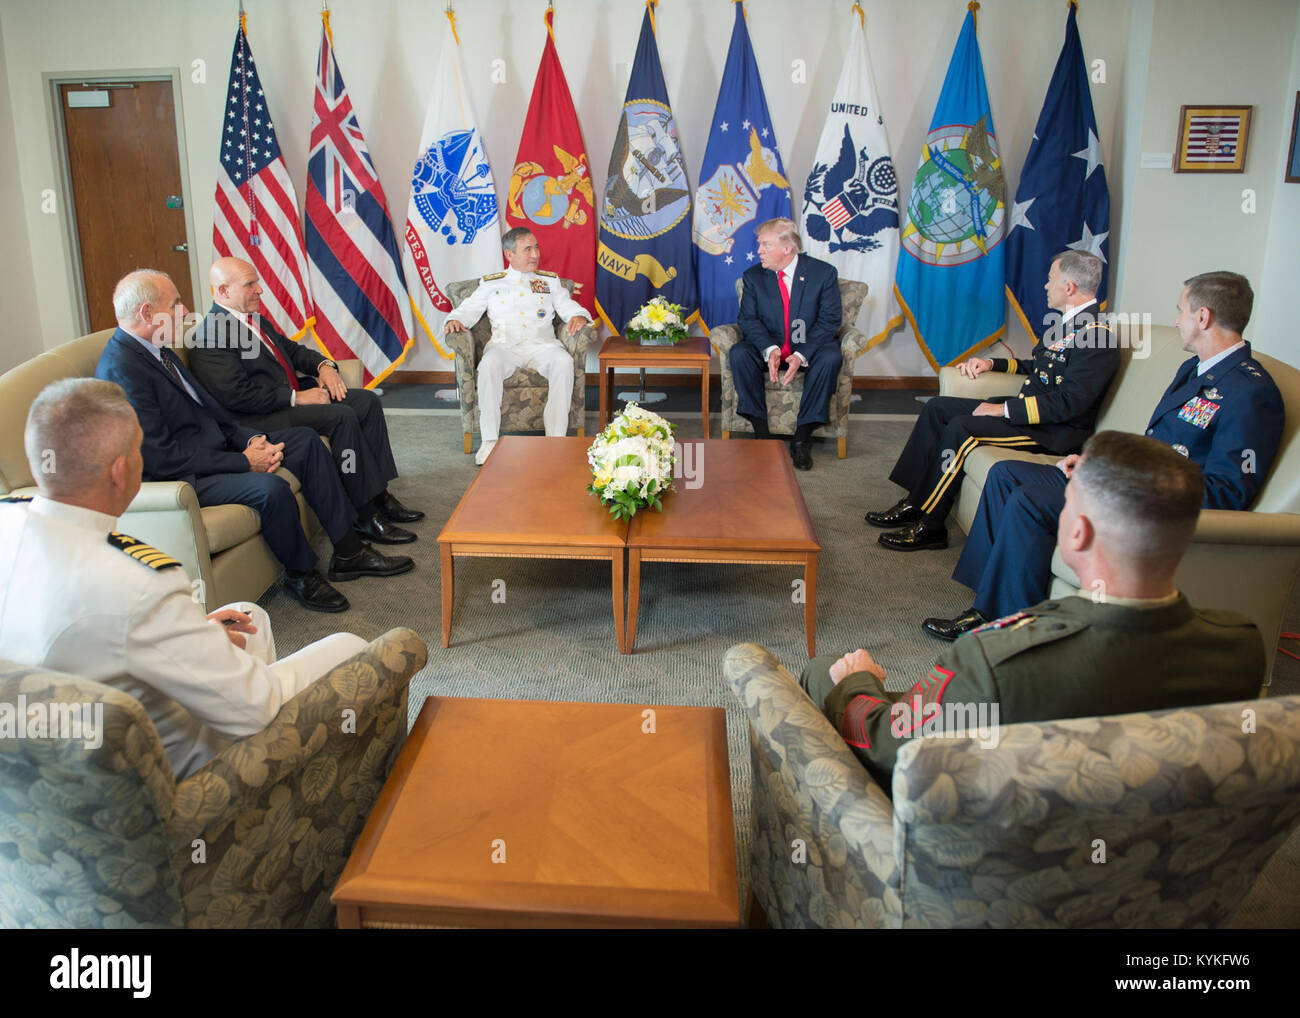 171103-N-WY954-092  CAMP H.M. SMITH, Hawaii (Nov. 3, 2017)Ñ President Donald J. Trump and U.S. Pacific Command (USPACOM) Commander, Adm. Harry Harris, sit down for a meeting at USPACOM headquarters.  The President is in Hawaii to receive a briefing from USPACOM prior to traveling to Japan, the Republic of Korea, China, Vietnam and the Philippines from November 3-14. During the trip the President will underscore his commitment to longstanding U.S. alliances and partnerships, and reaffirm U.S. leadership in promoting a free and open Indo-Asia-Pacific region. (U.S. Navy photo by Mass Communicatio Stock Photo